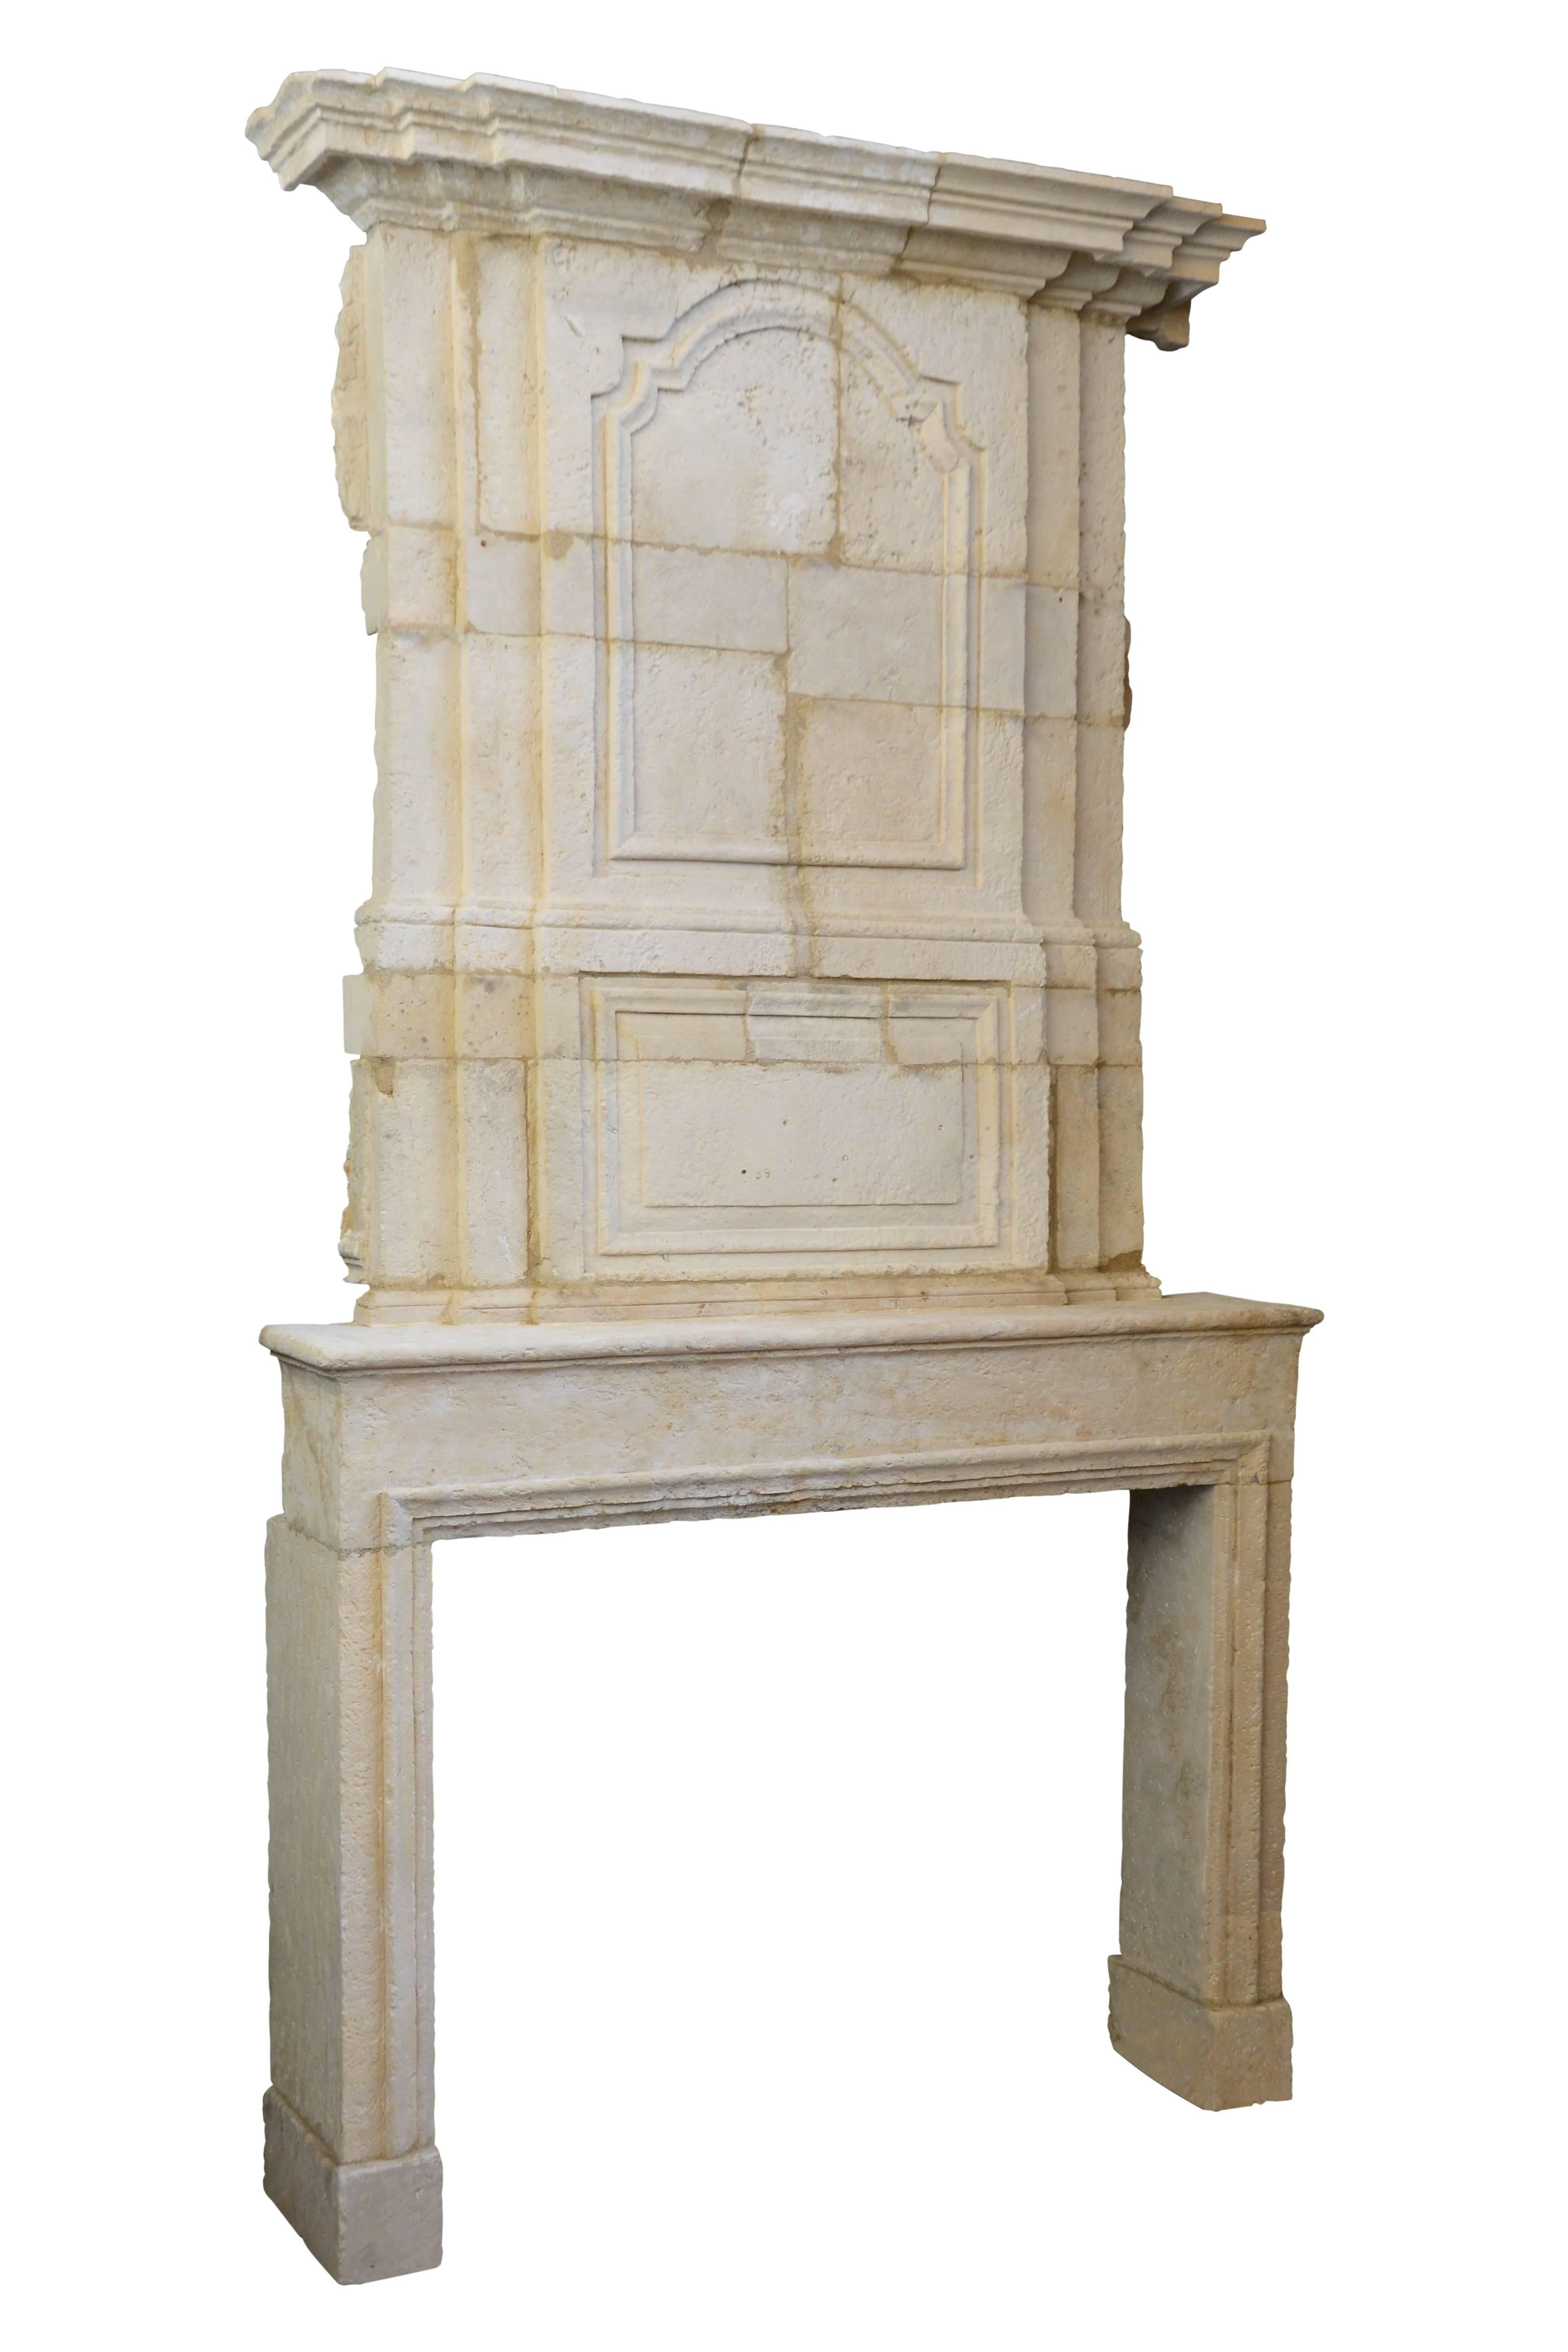 Carved Louis XIV Period Stone Fireplace, 18th Century